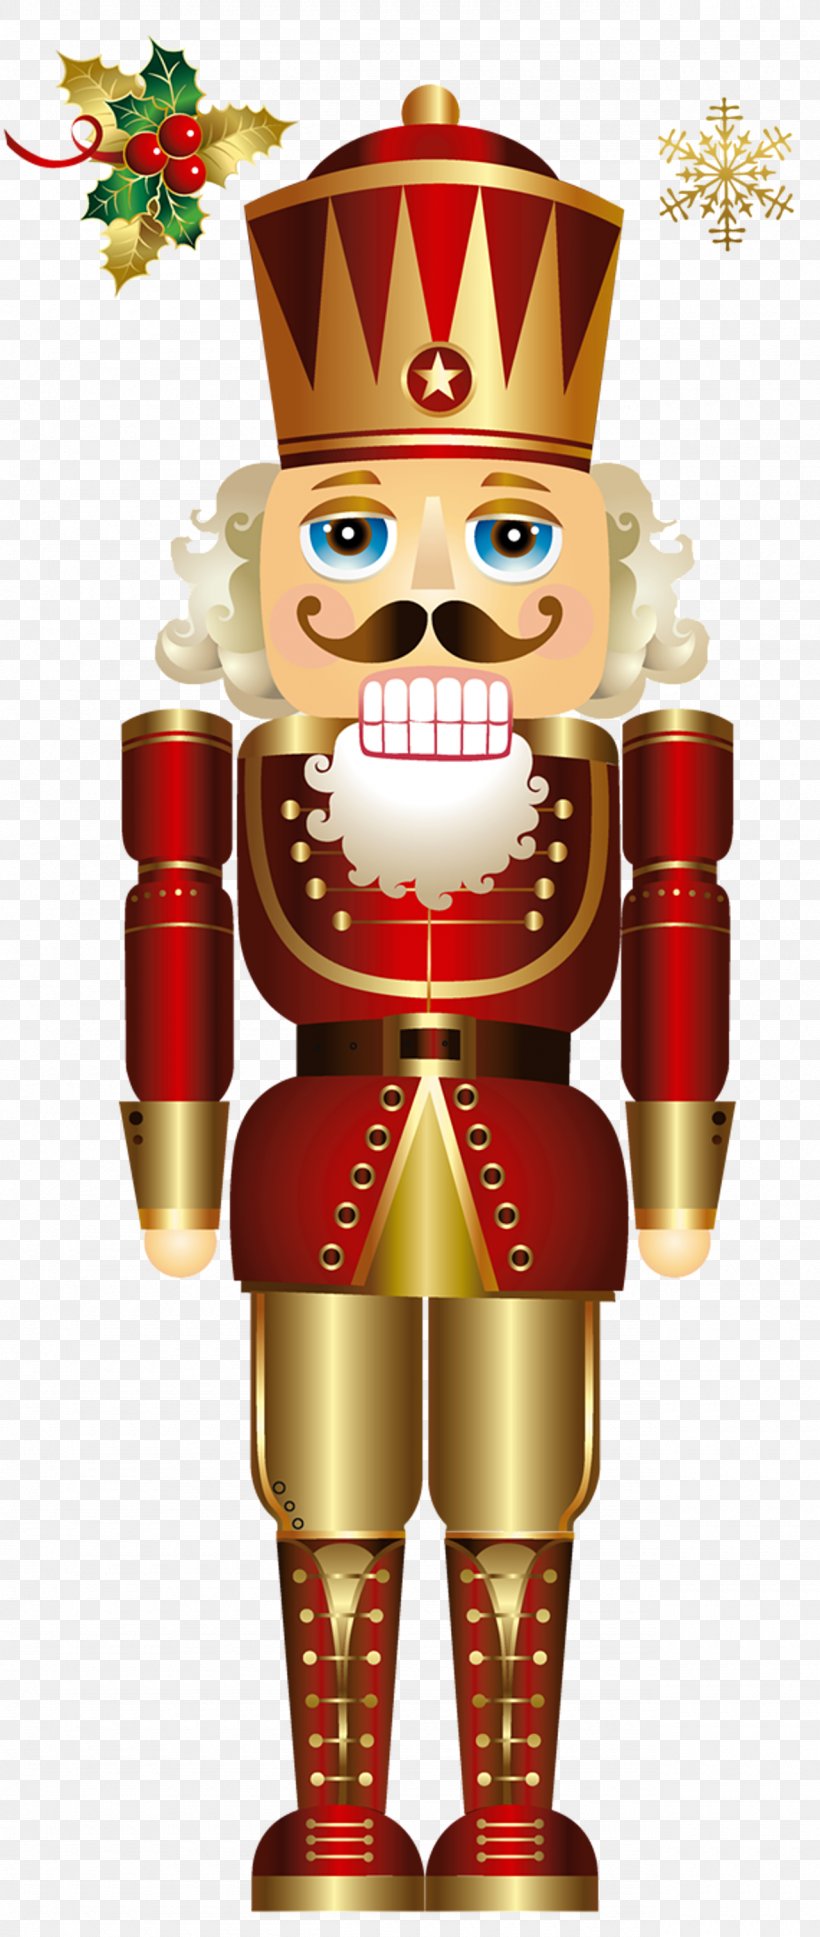 The Nutcracker And The Mouse King Nutcracker Doll Clip Art, PNG, 1280x3025px, Nutcracker And The Mouse King, Christmas, Christmas Decoration, Christmas Ornament, Decor Download Free